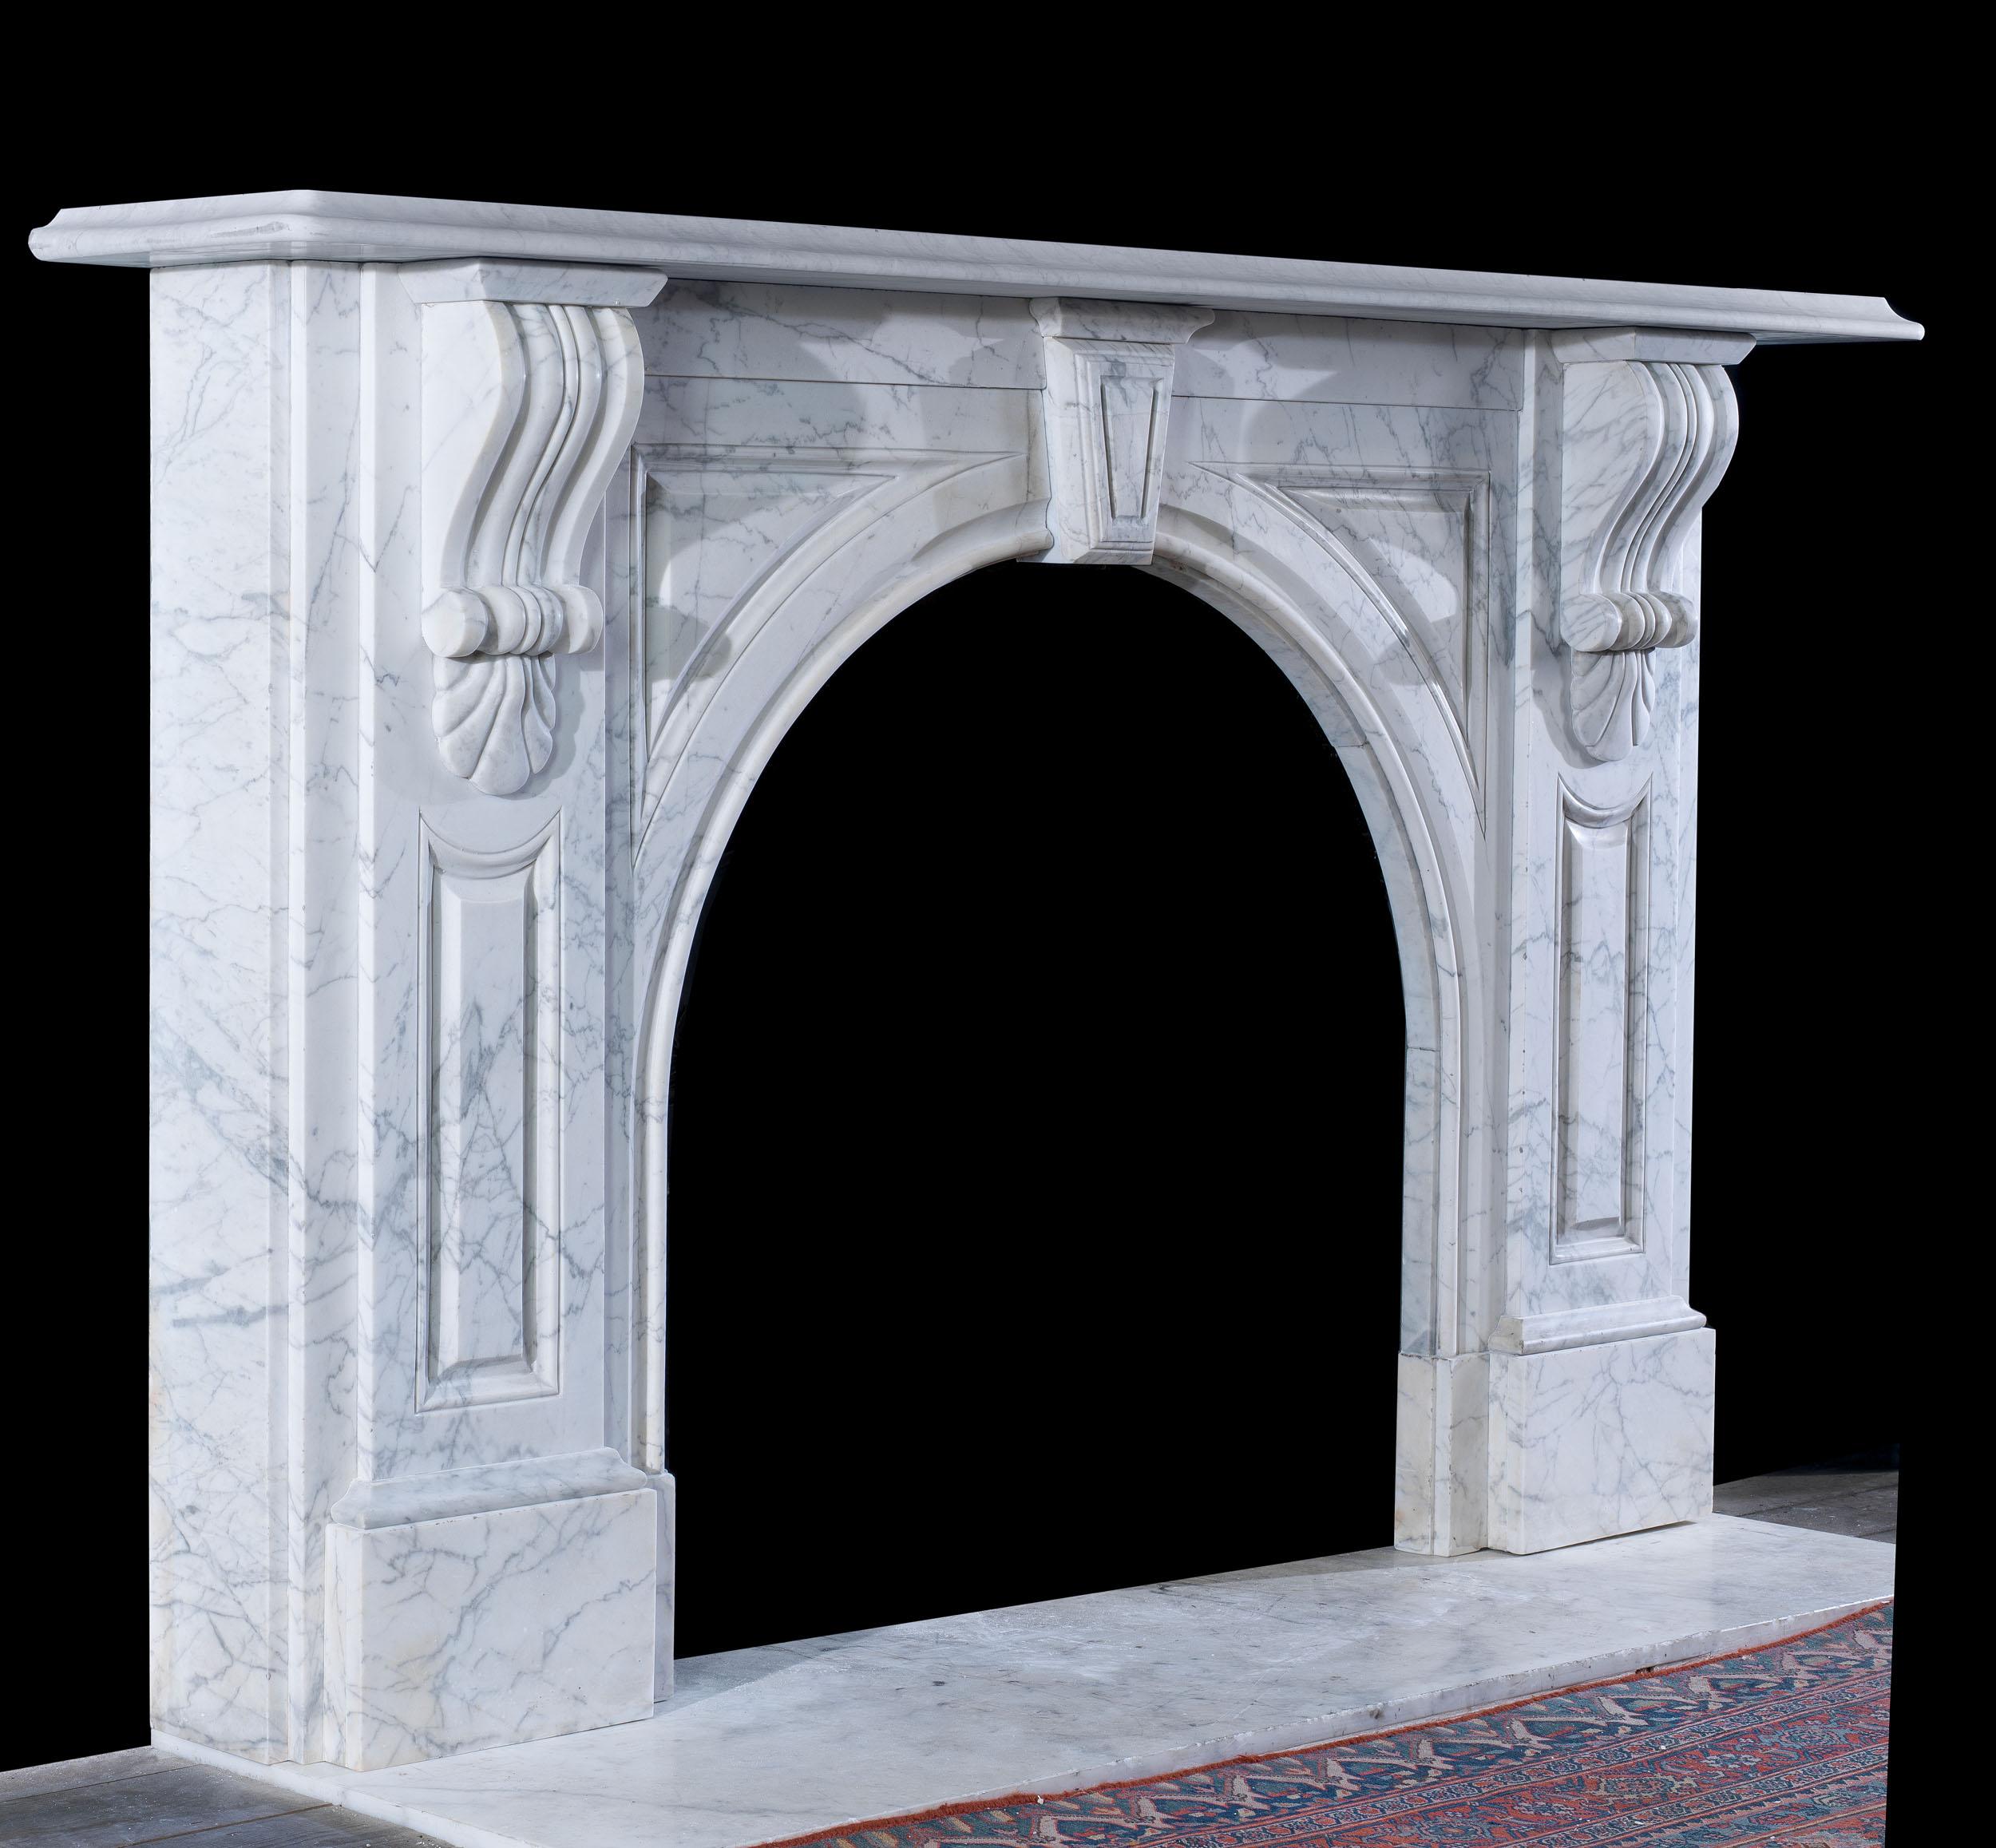 A large Victorian arched fireplace in pencil statuary marble. The fireplace features a wide moulded shelf over an arched opening carved with panelled spandrels. The boldly carved acanthus corbels are mounted on panelled jambs over plain